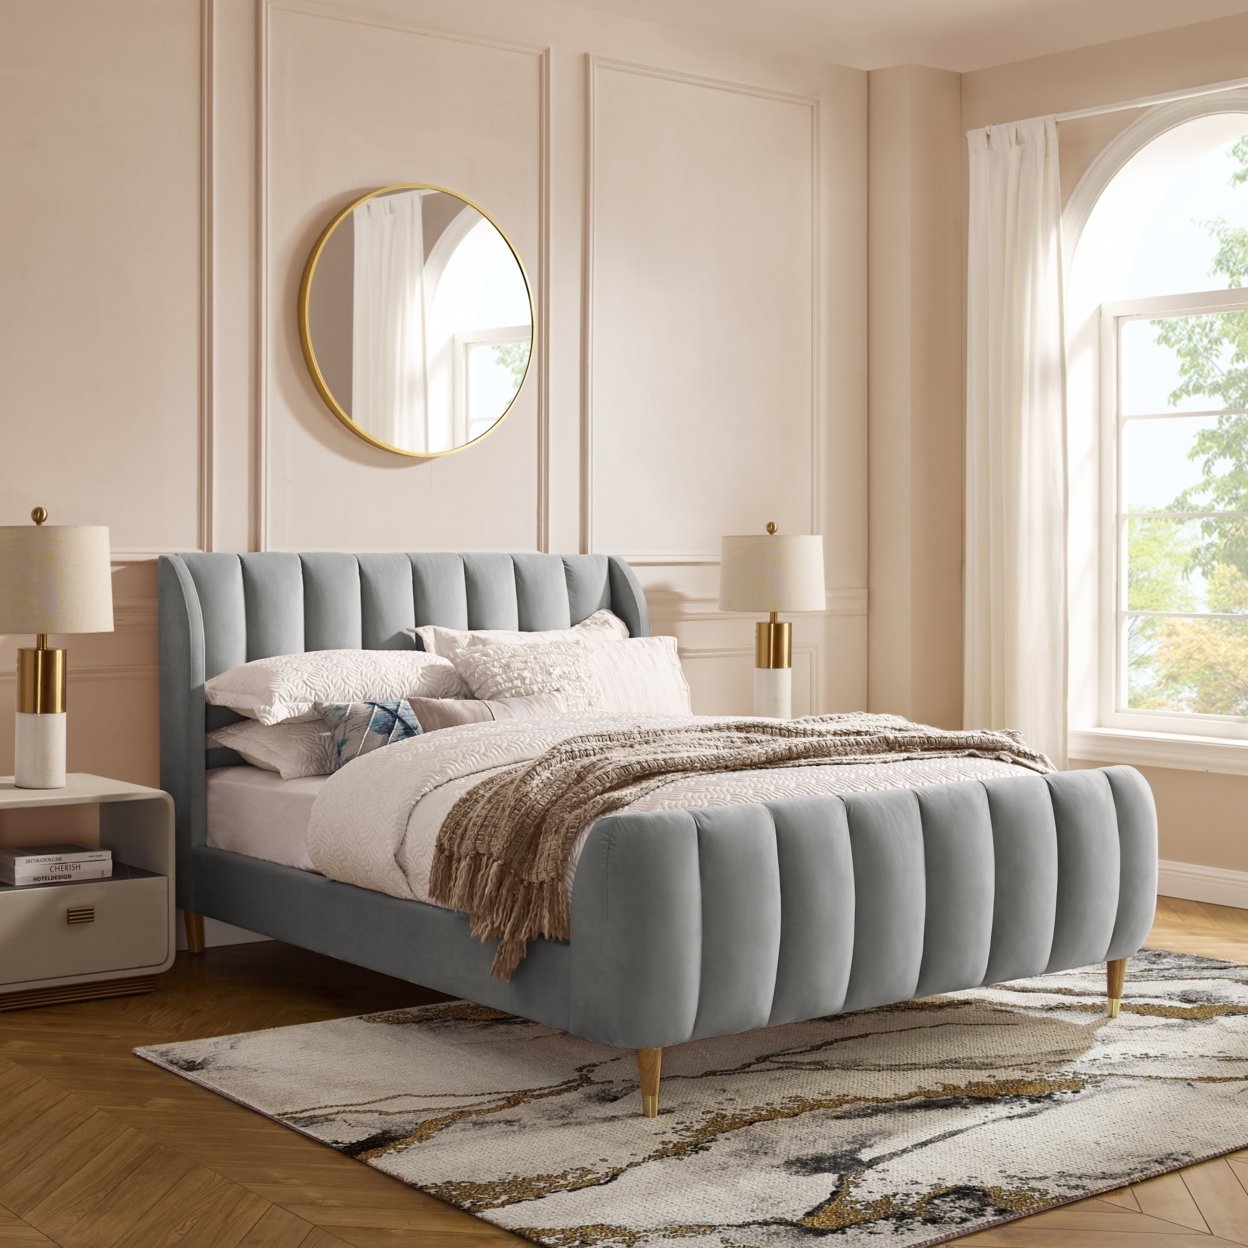 Sana Bed-Upholstered-Channel Tufted-Slats Included - Grey, Queen